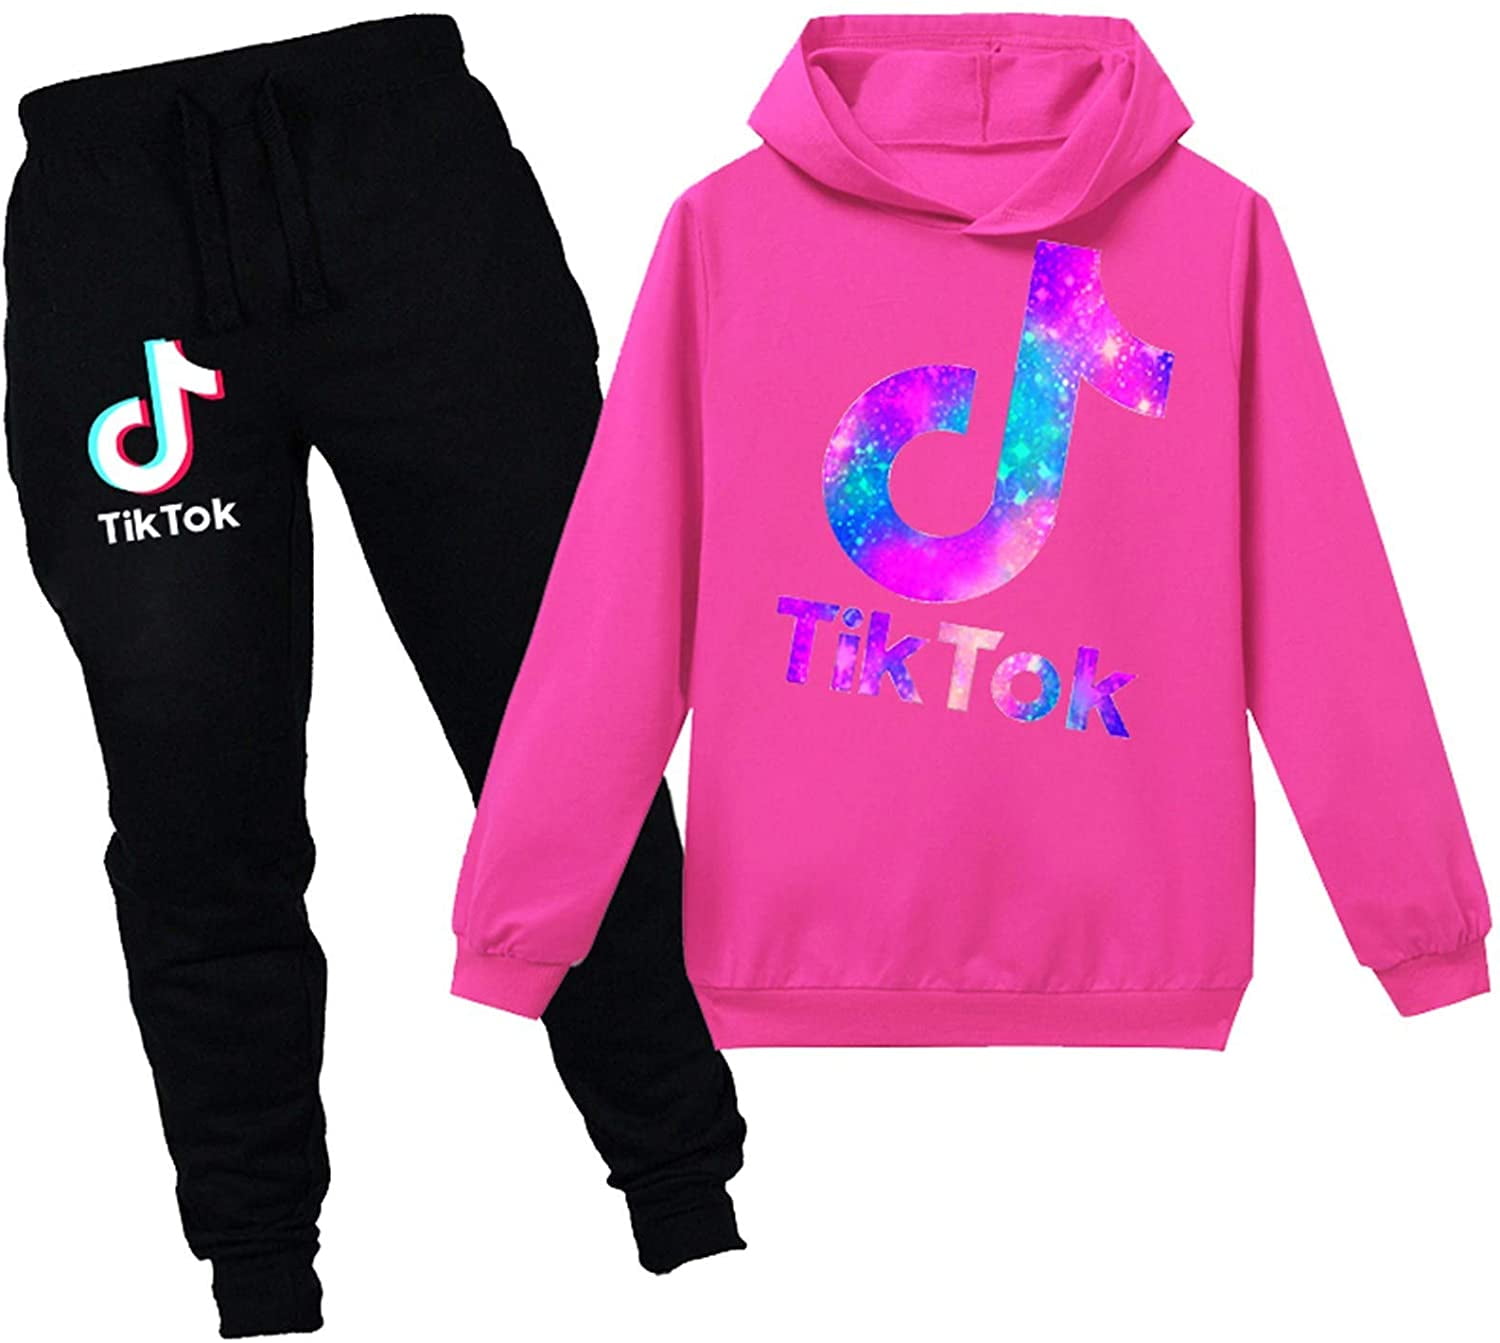 Boys Girls TIK-Tok Pullover Hoodie and Sweatpants Set for Kids 2 Piece Outfit Fashion Jogging Suits